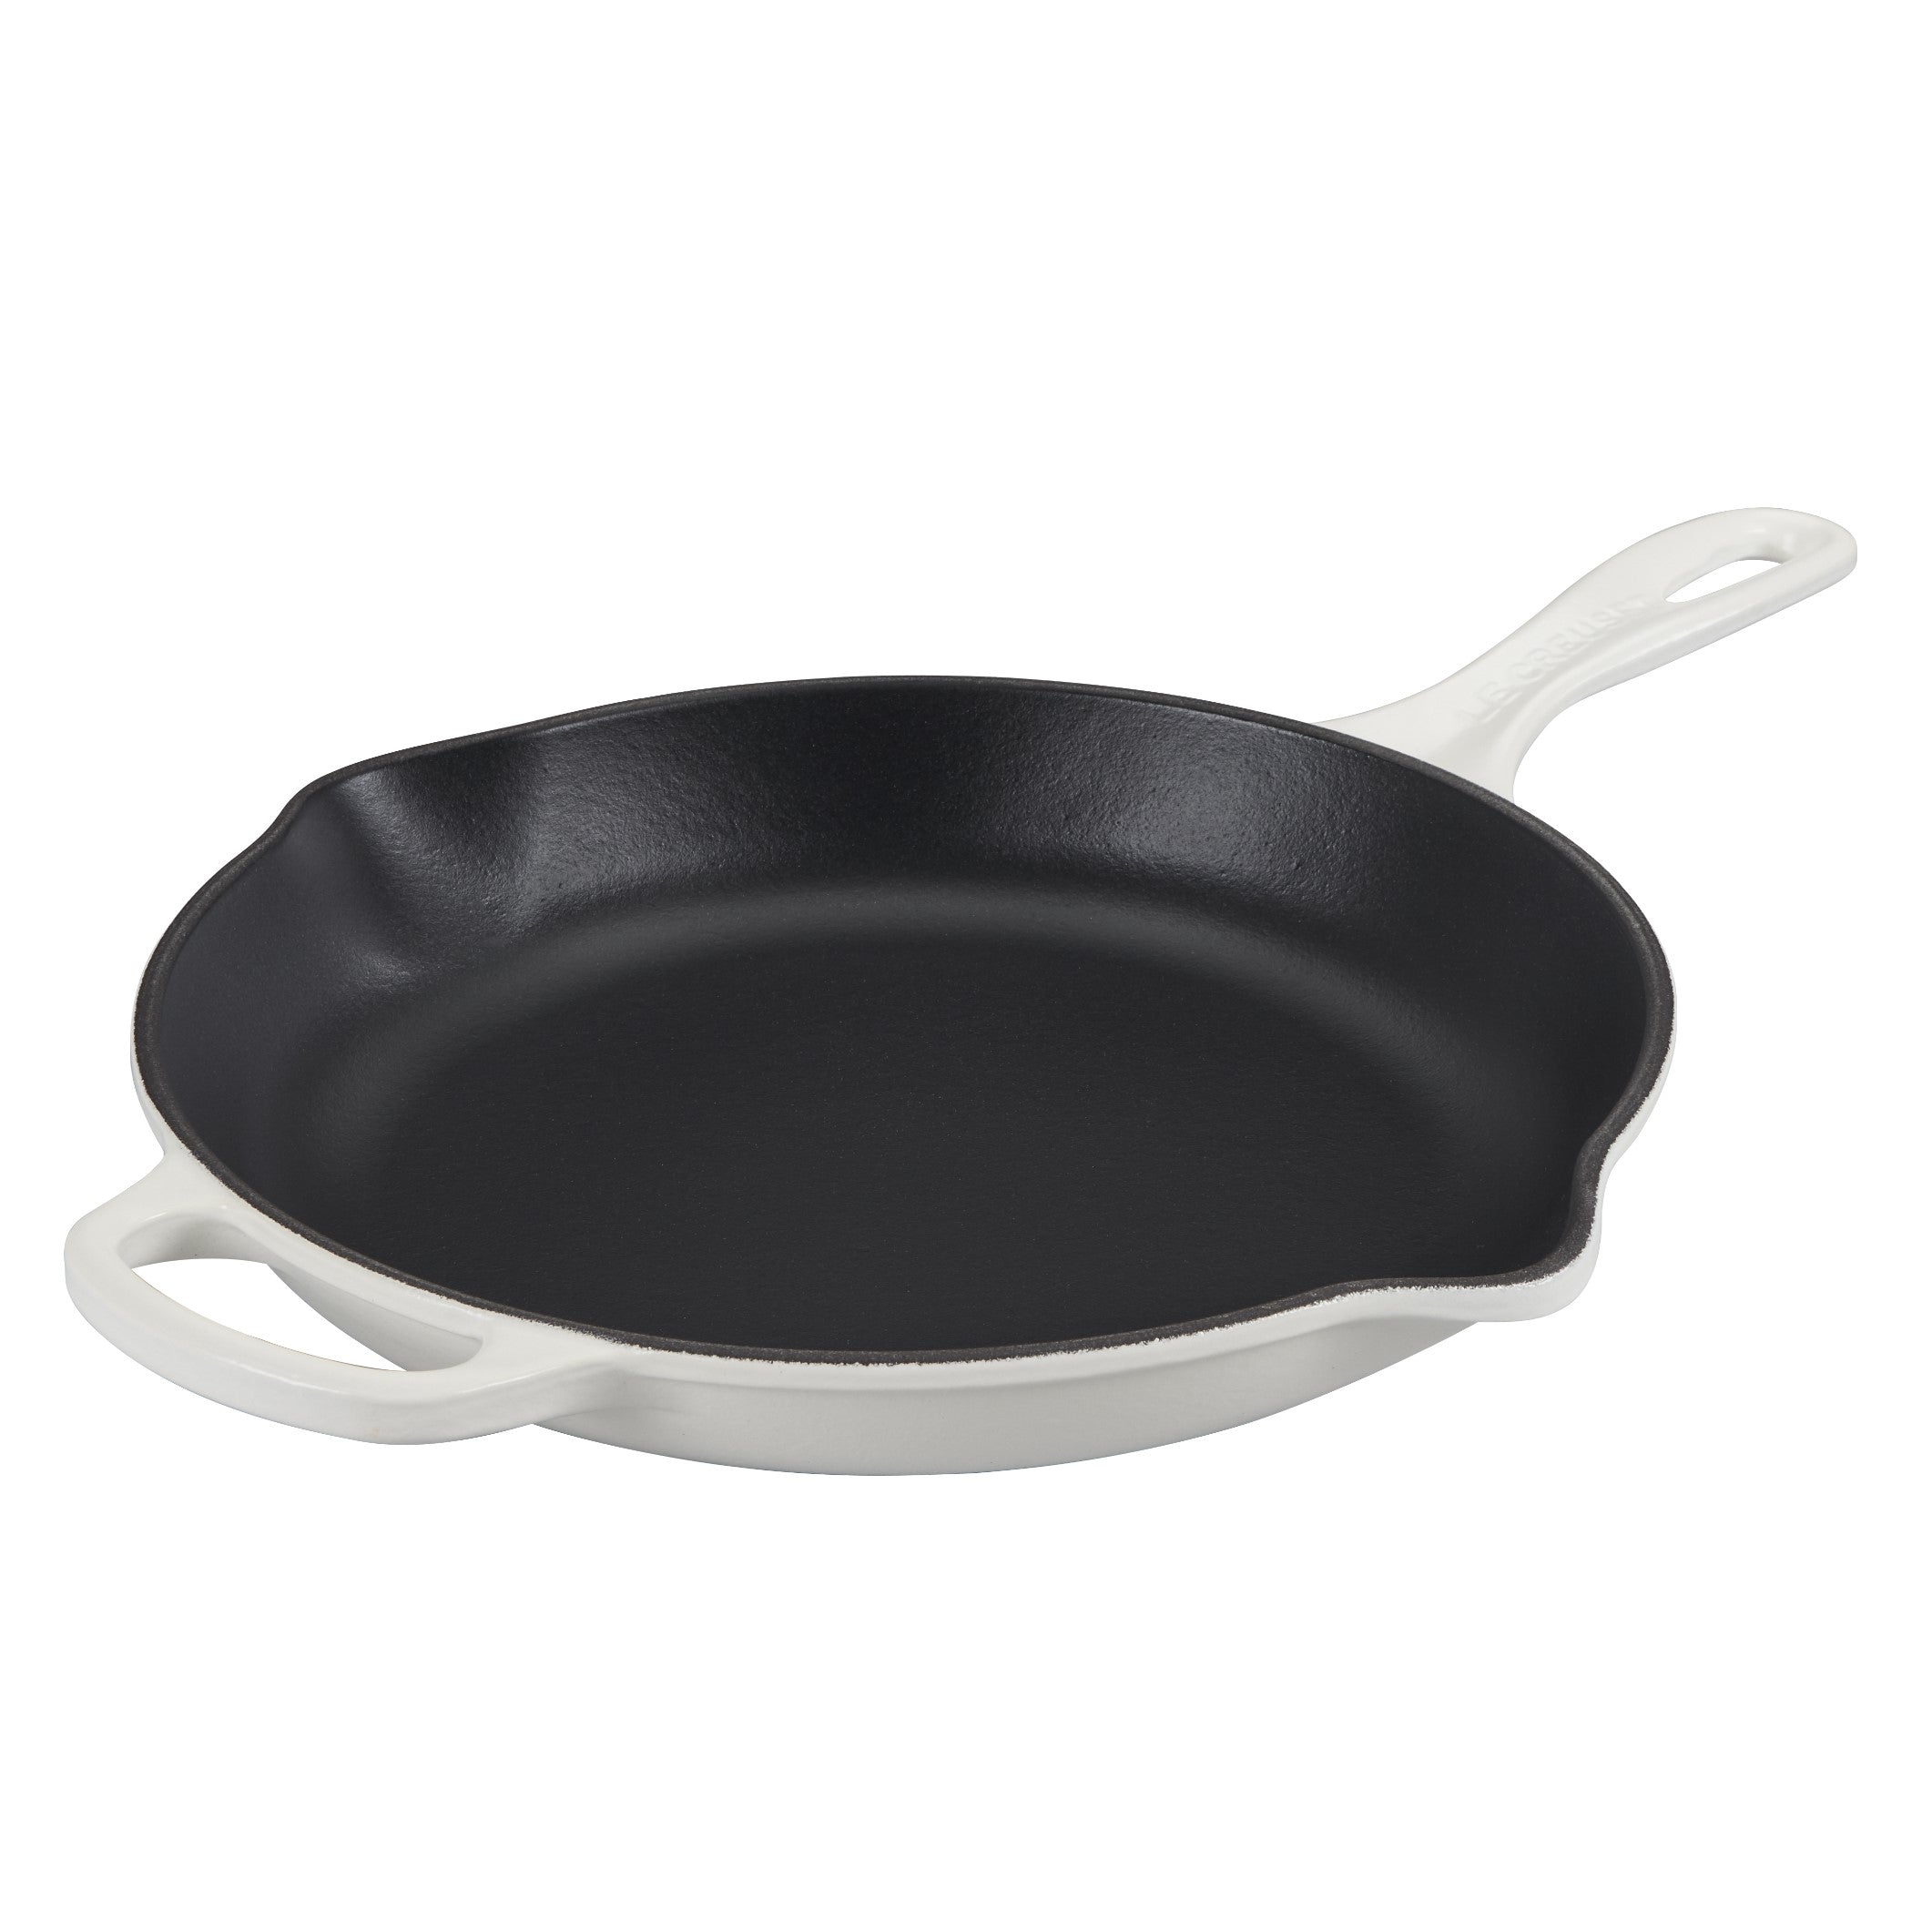 Le Creuset 10.25 Inch Iron Handle Skillet